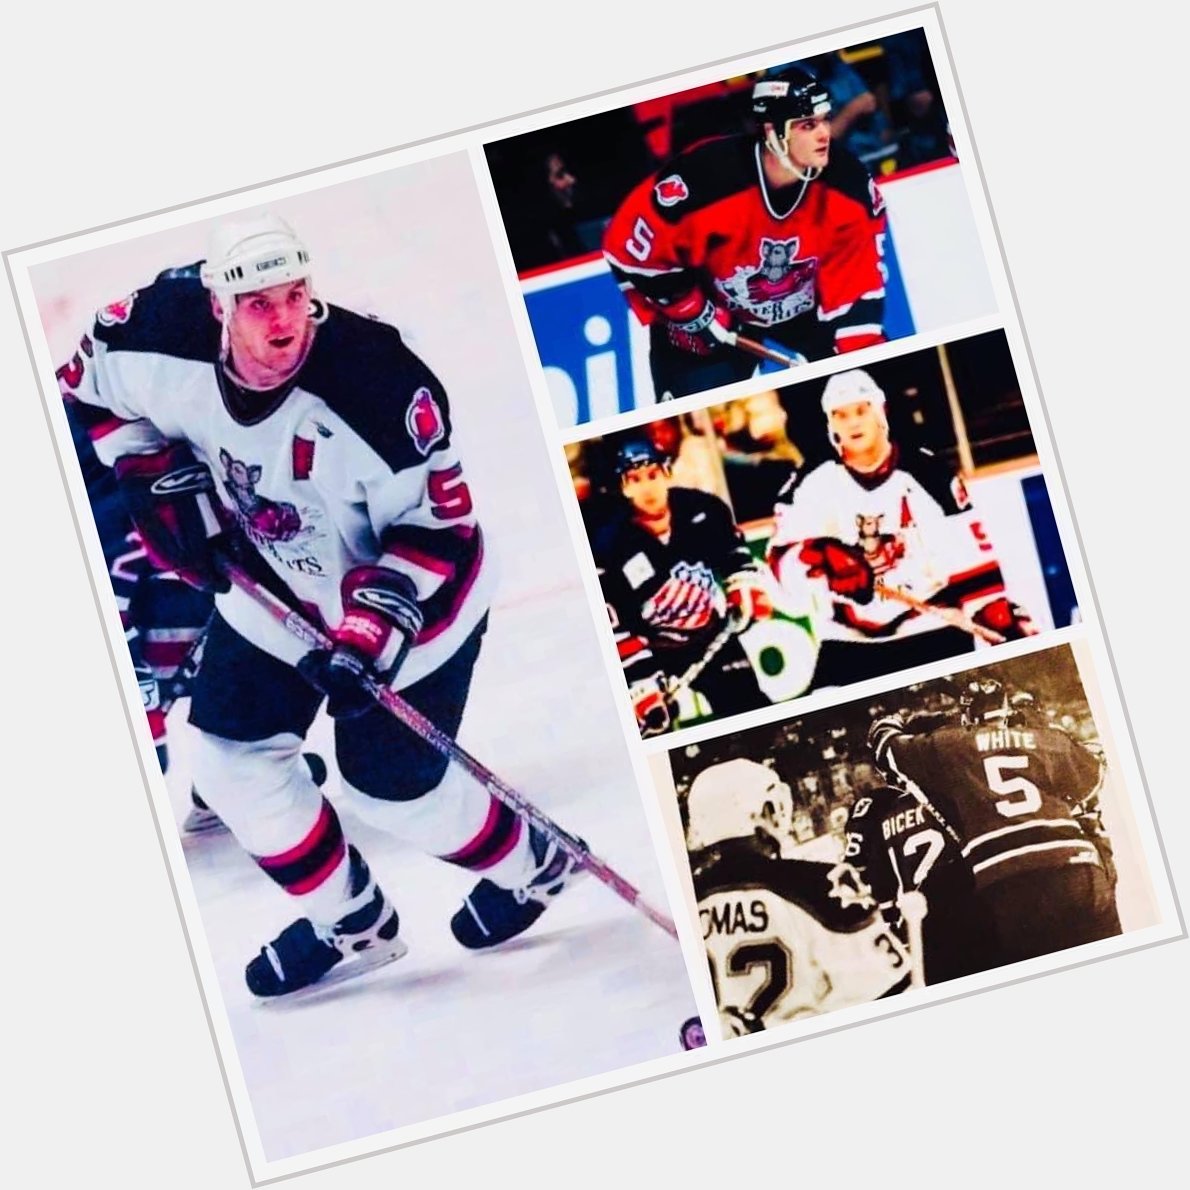 Happy hockey birthday to former Albany River Rats defenseman and 2X Stanley Cup champion Colin White. 